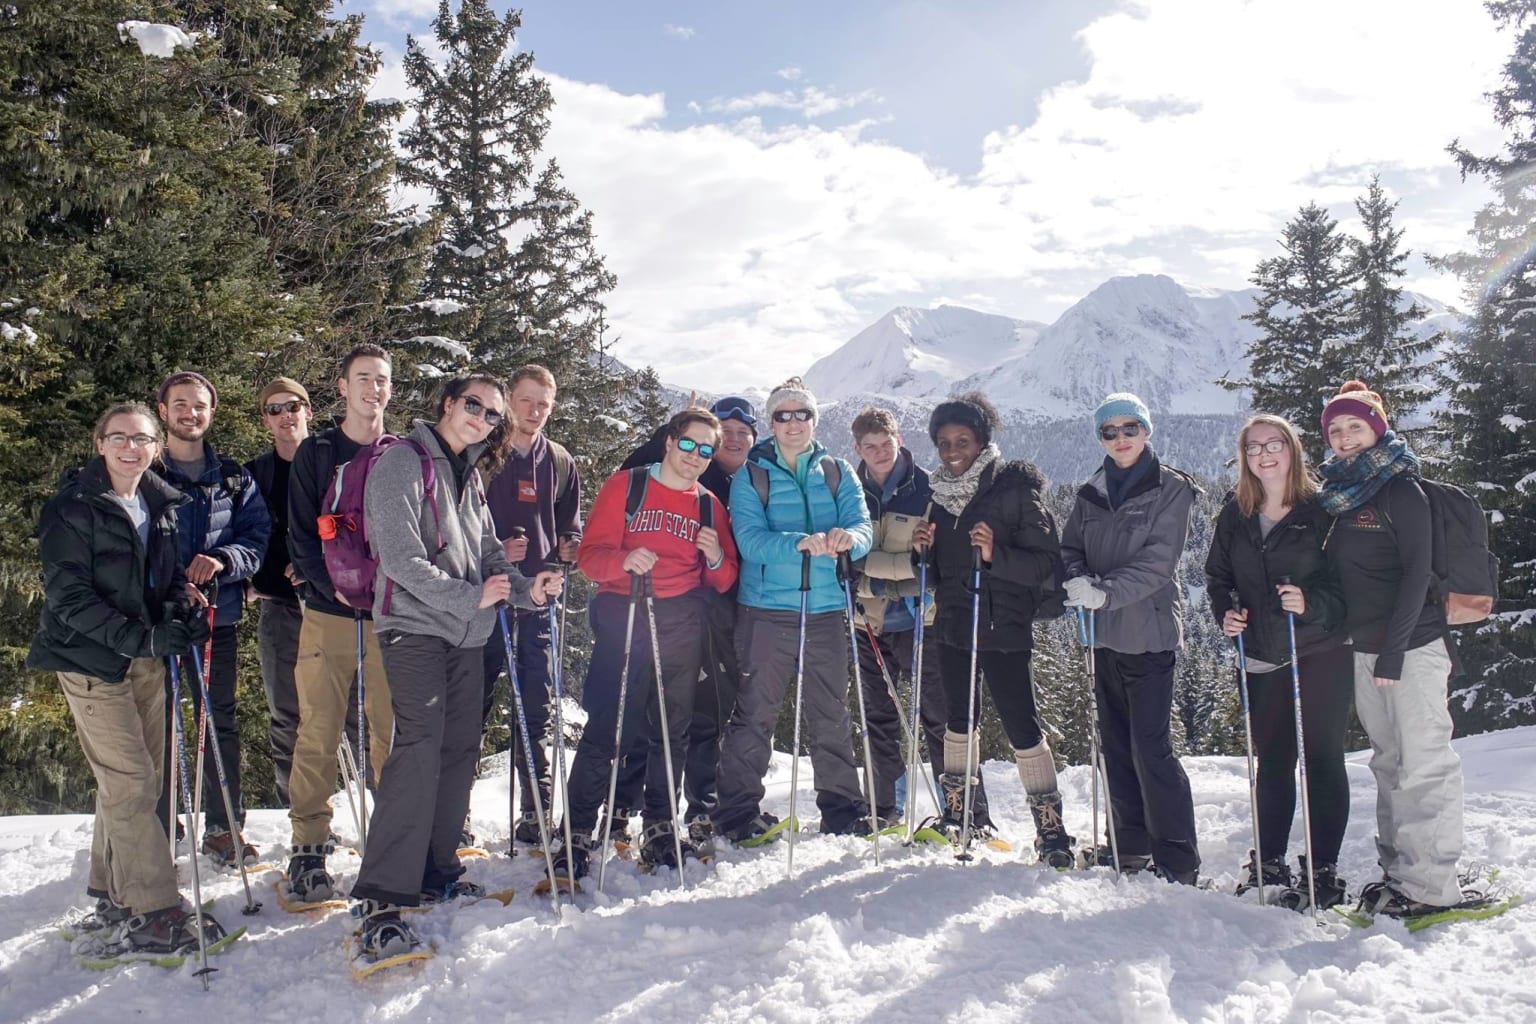 Group of students on a ski mountain in ski gear.